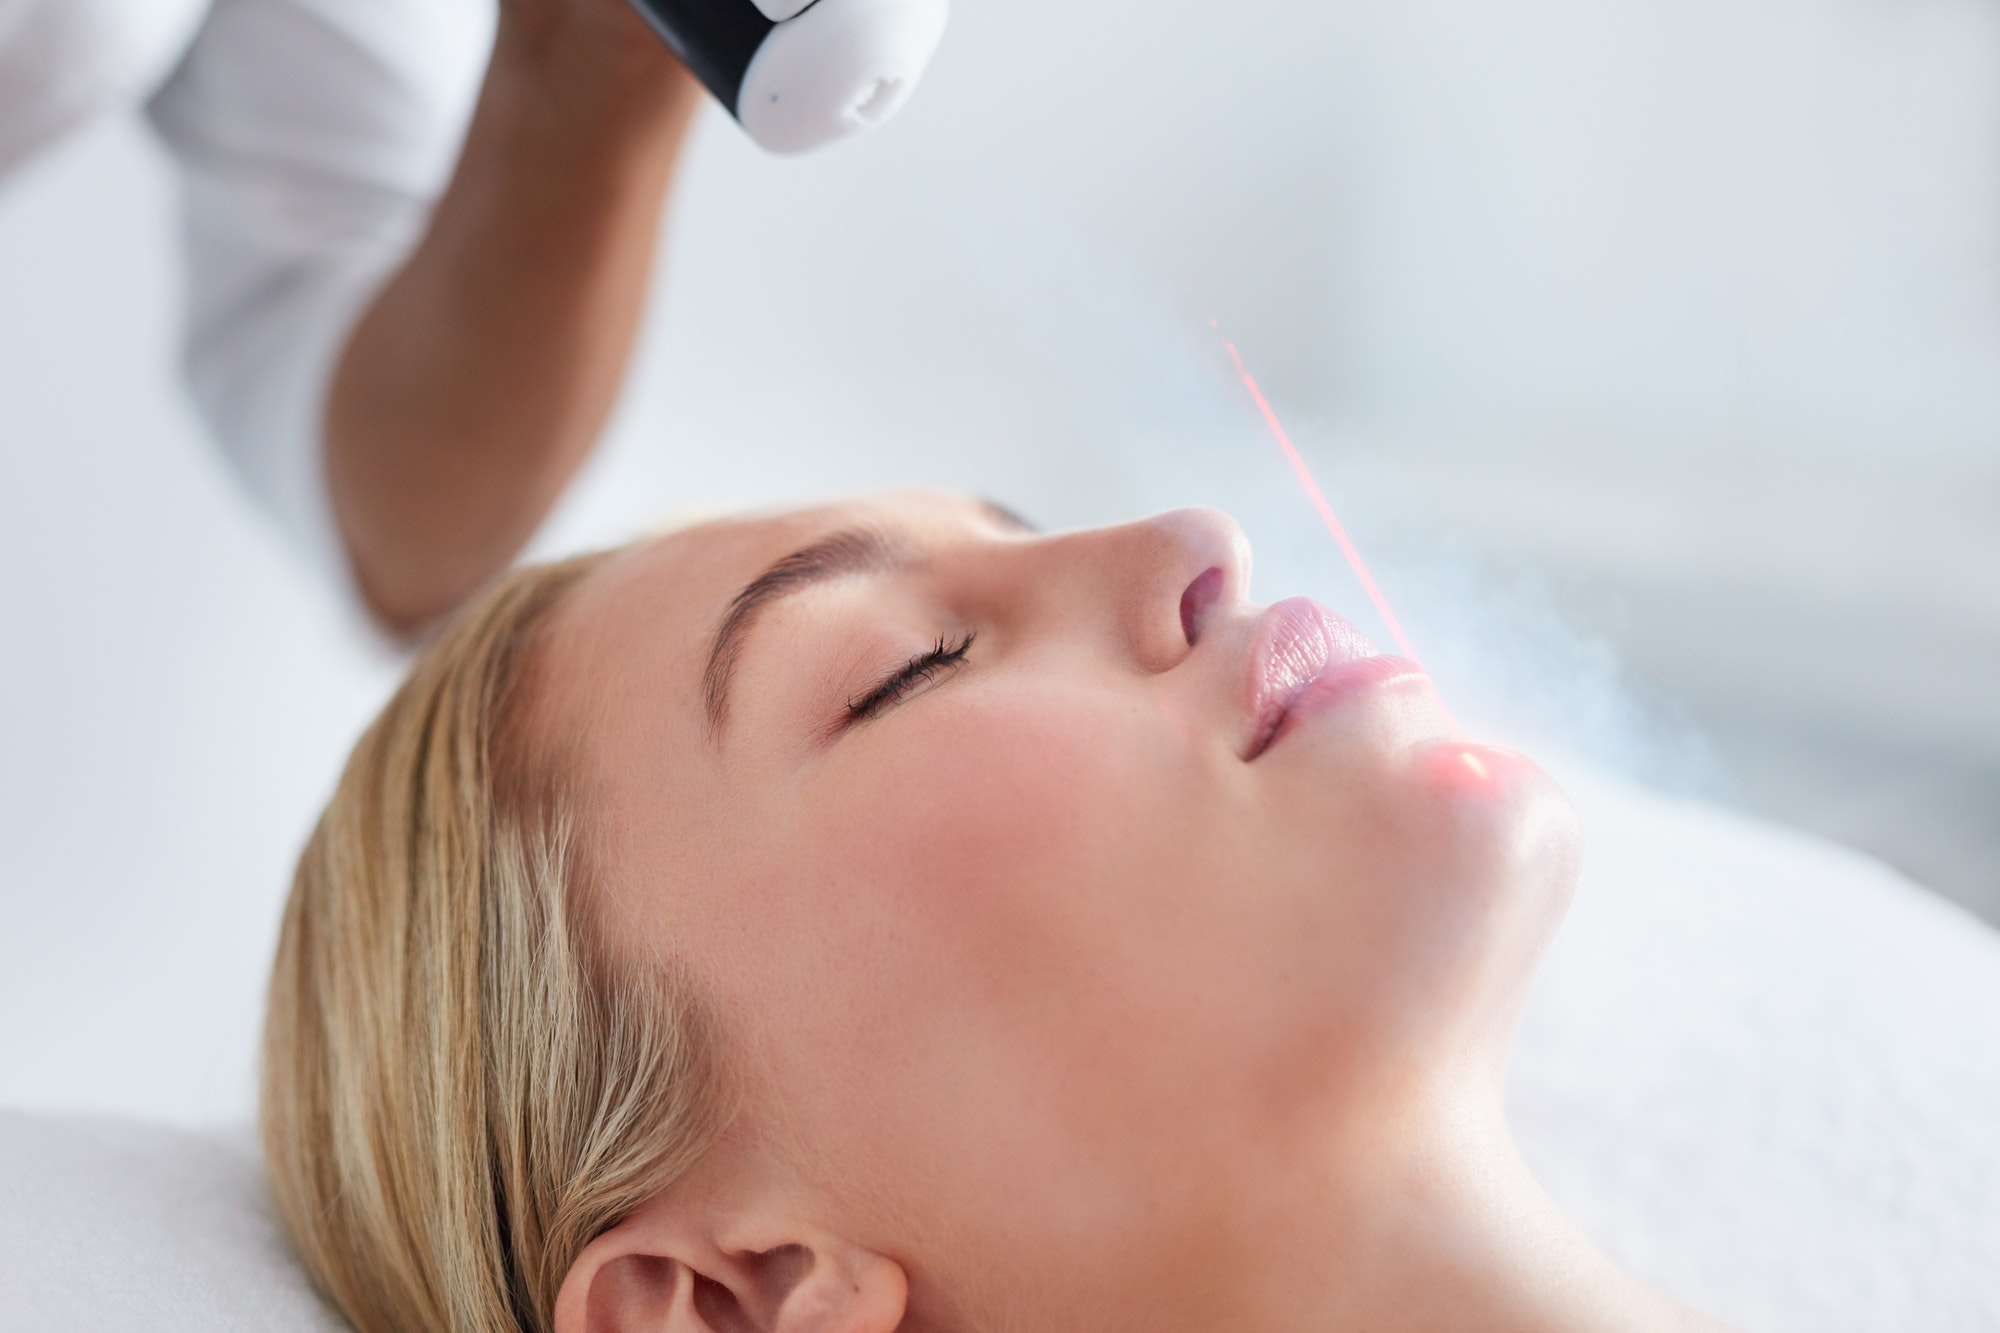 Young woman receiving local cryotherapy on her face